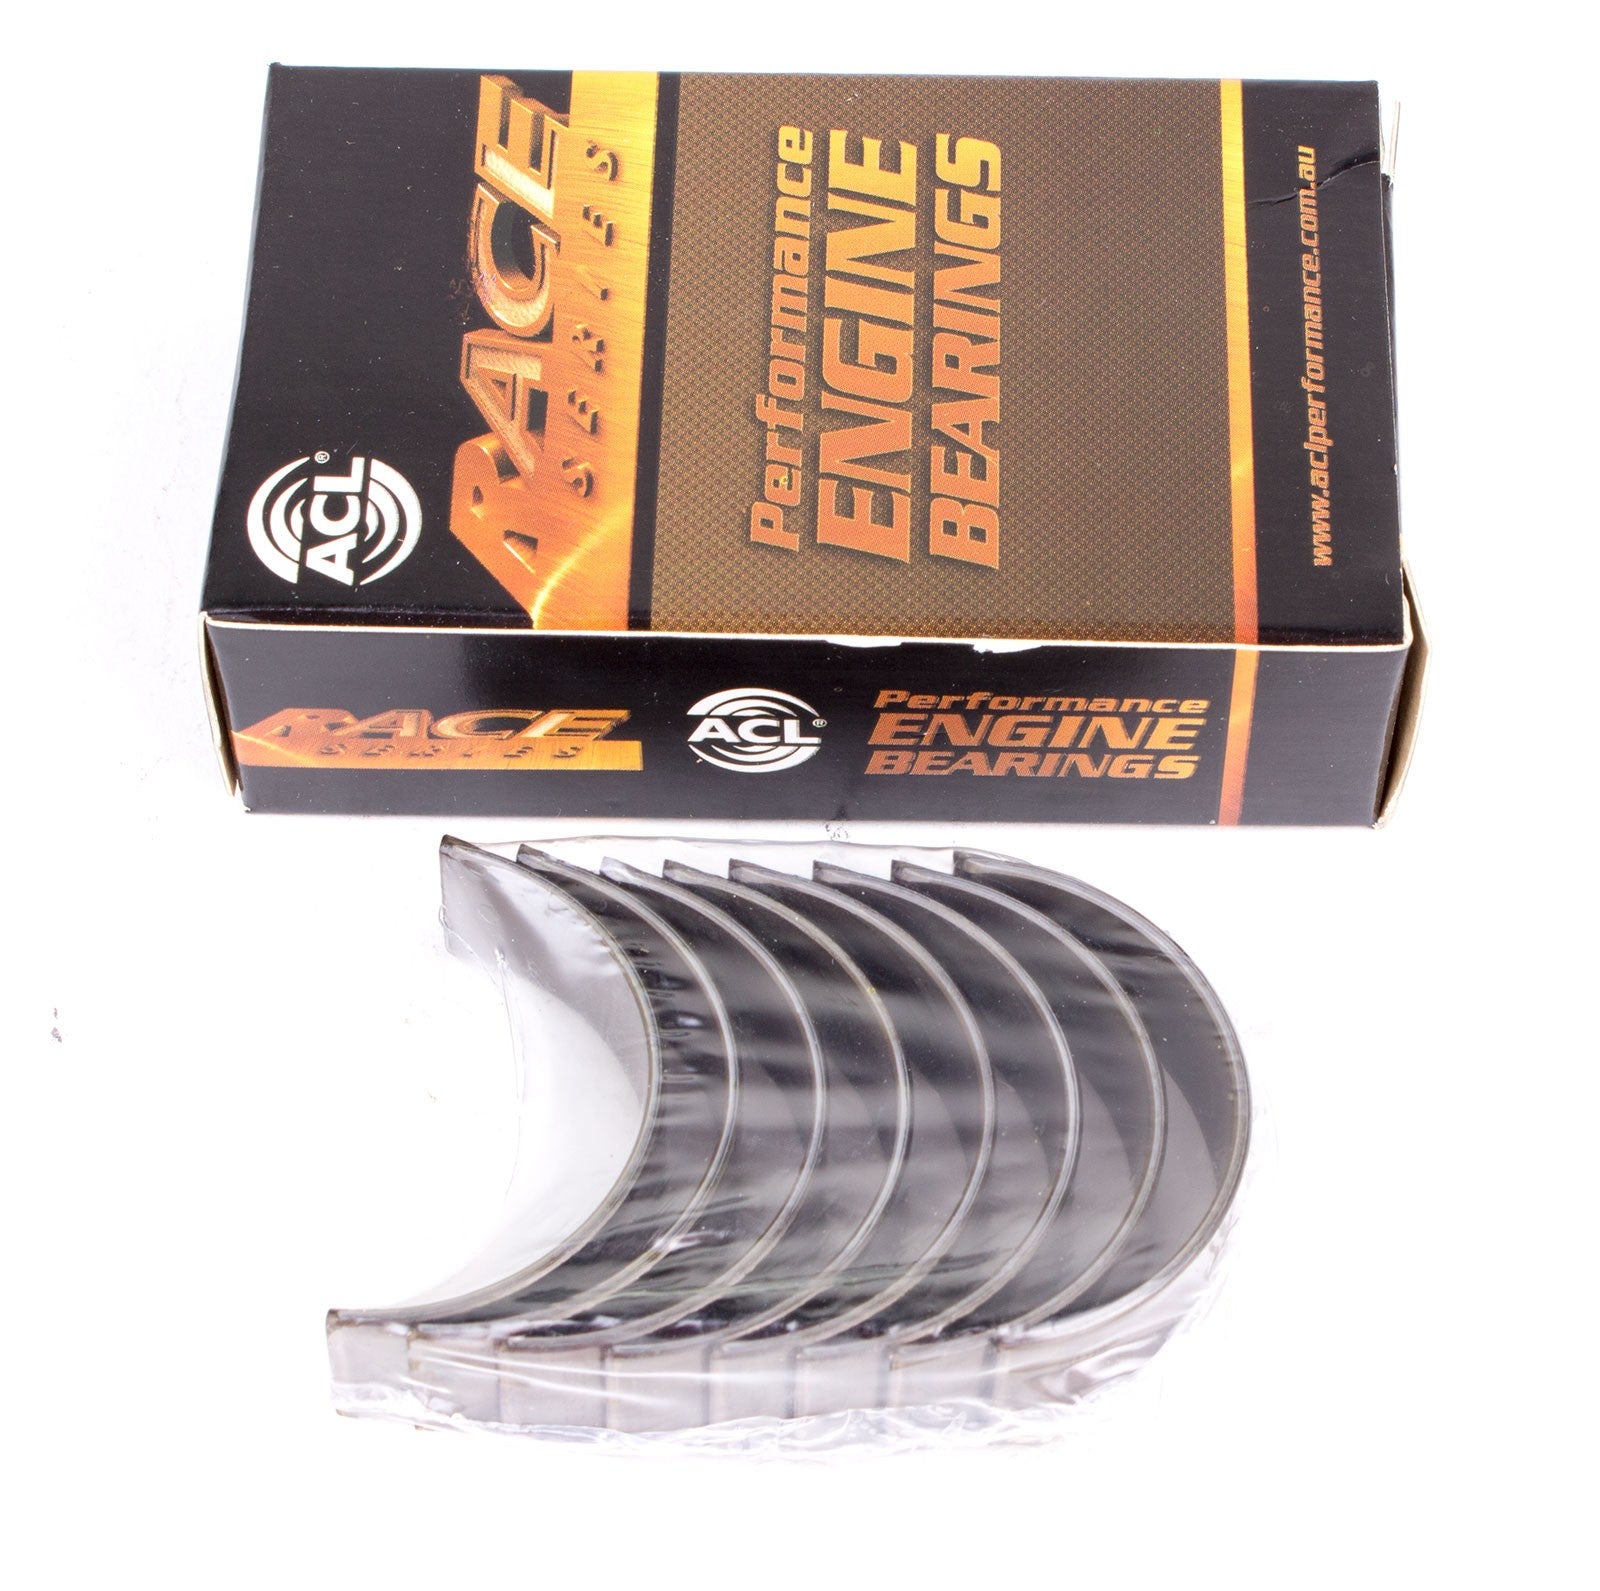 ACL 5M7819H-.25 Main bearing set (ACL Race Series) Photo-0 